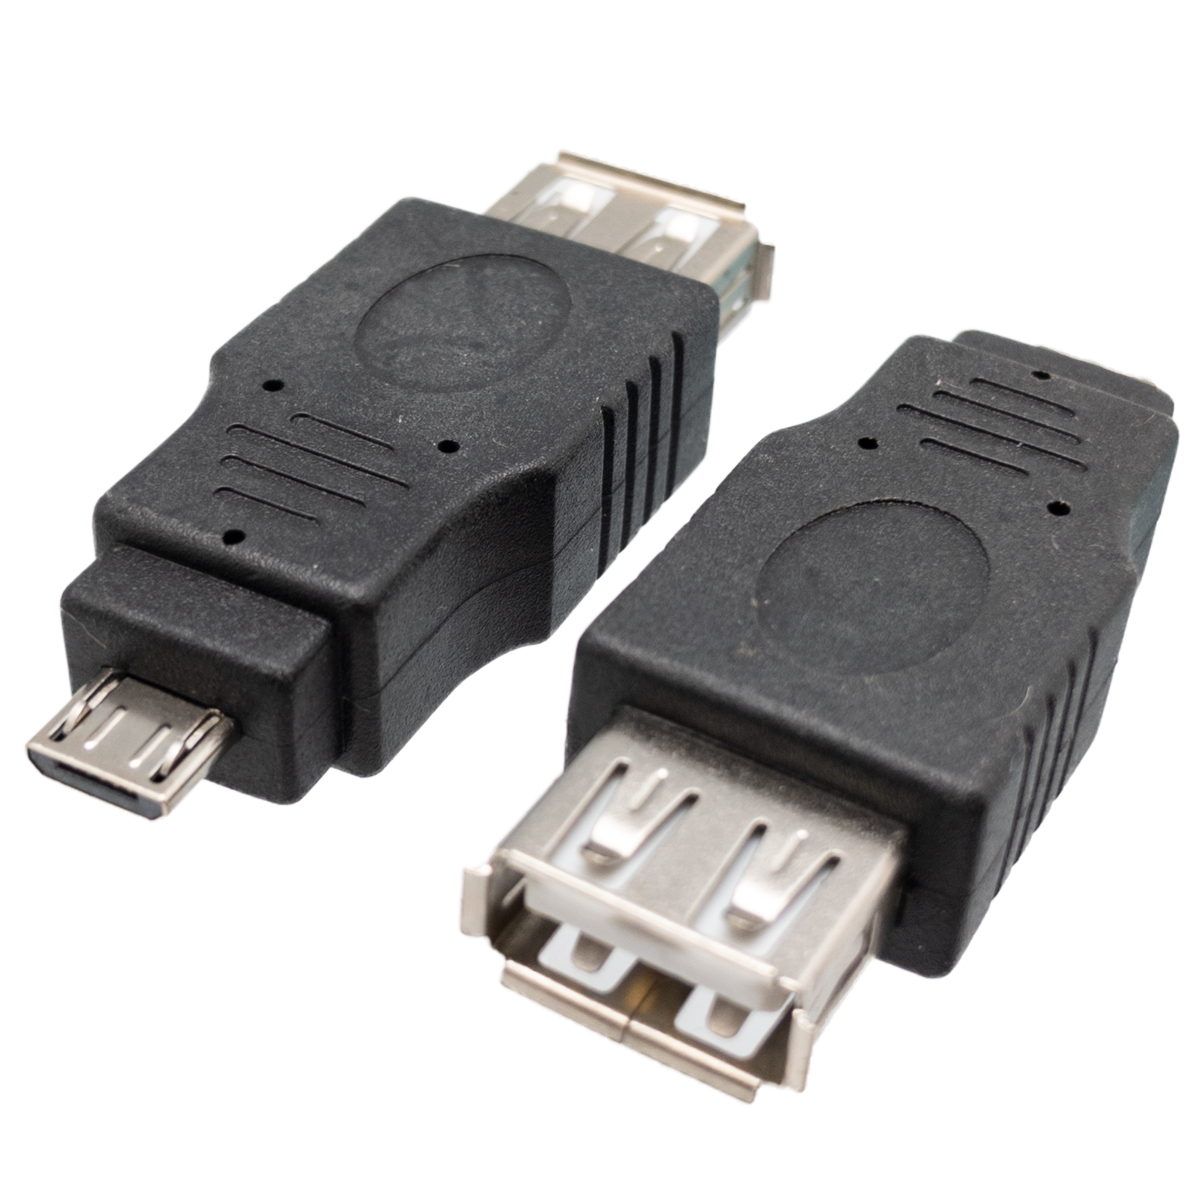 USB 2.0 A FEMALE to MICRO USB 5p MALE, NICKLE, BLACK COLOR